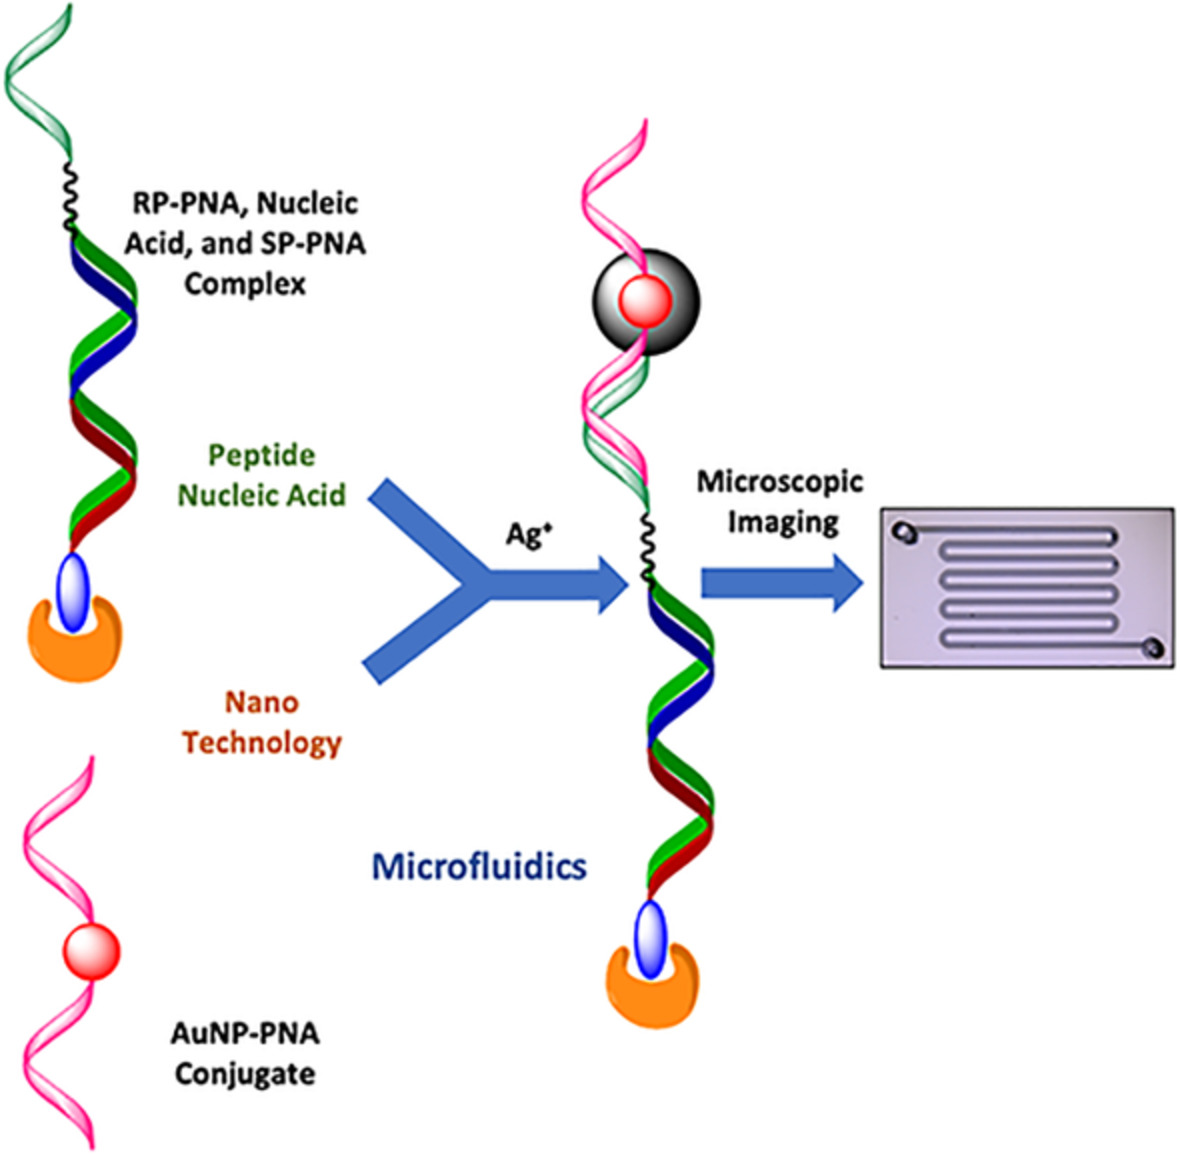 Cyclopentane peptide nucleic acid: Gold nanoparticle conjugates for the detection of nucleic acids in a microfluidic format